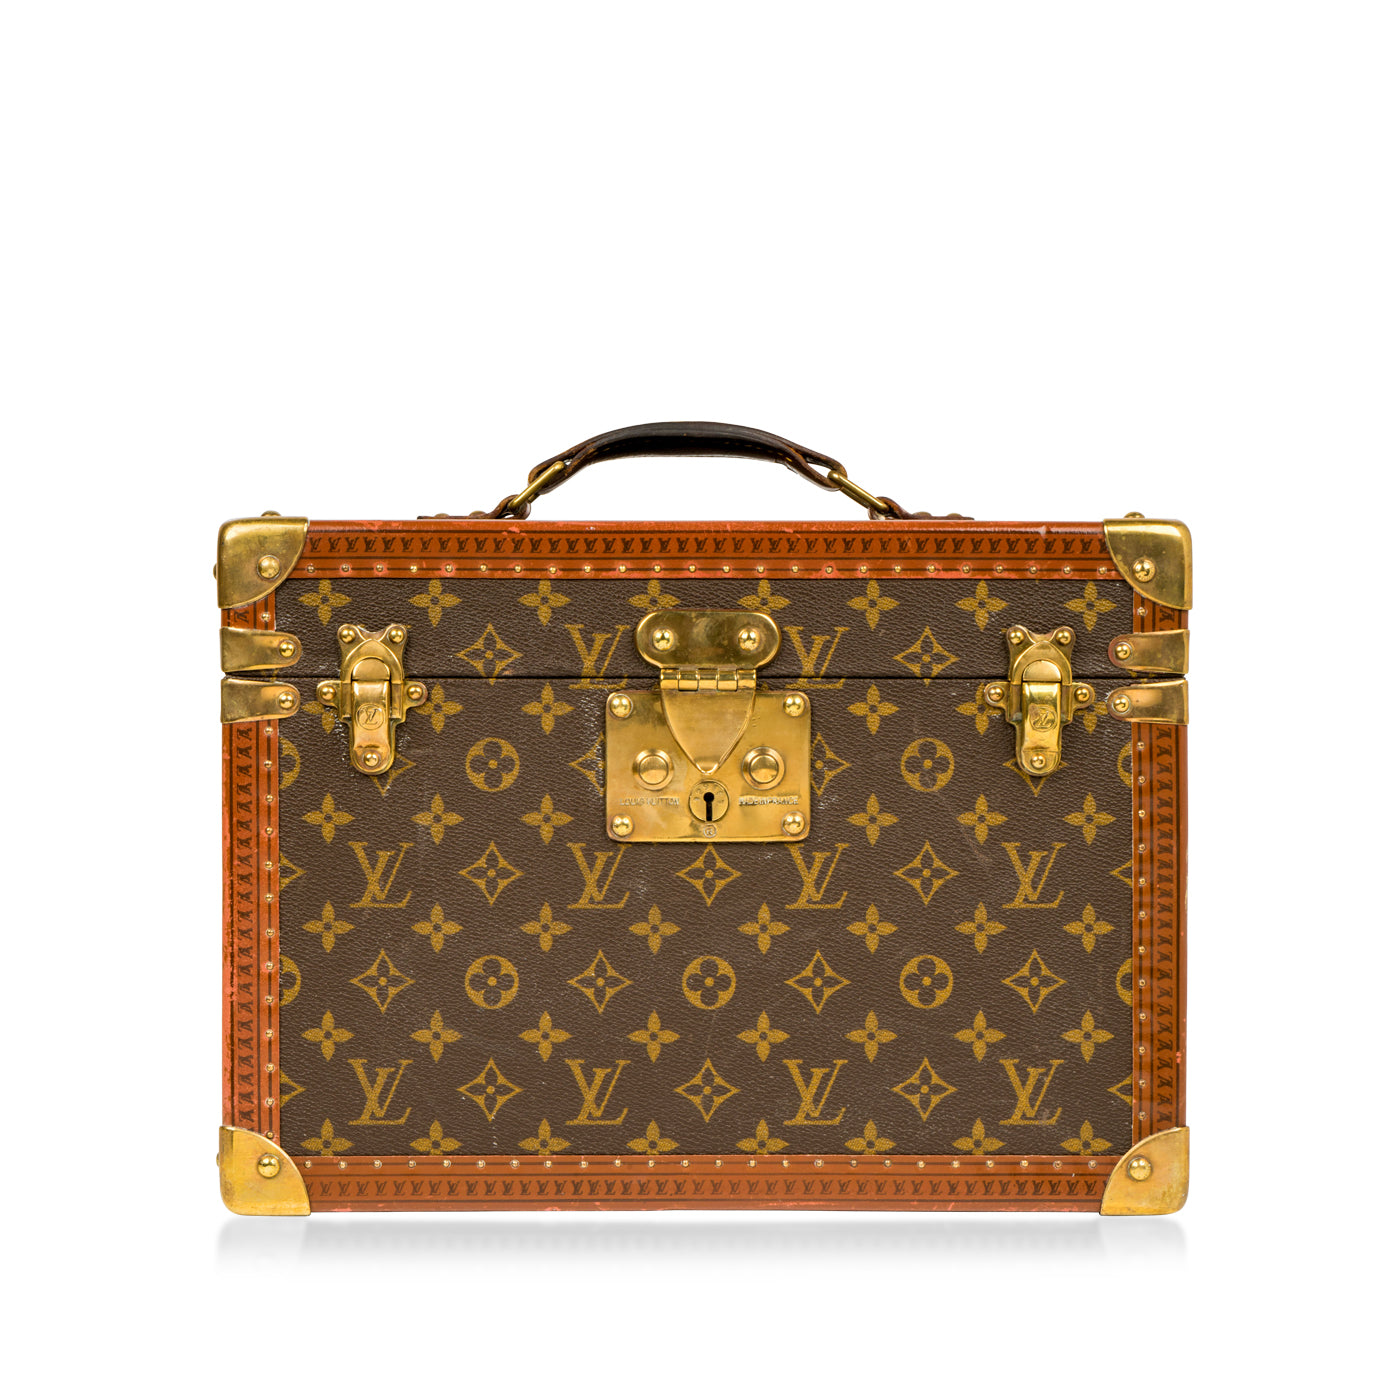 LOUIS VUITTON- History and Timeline, by Kajal Makhija